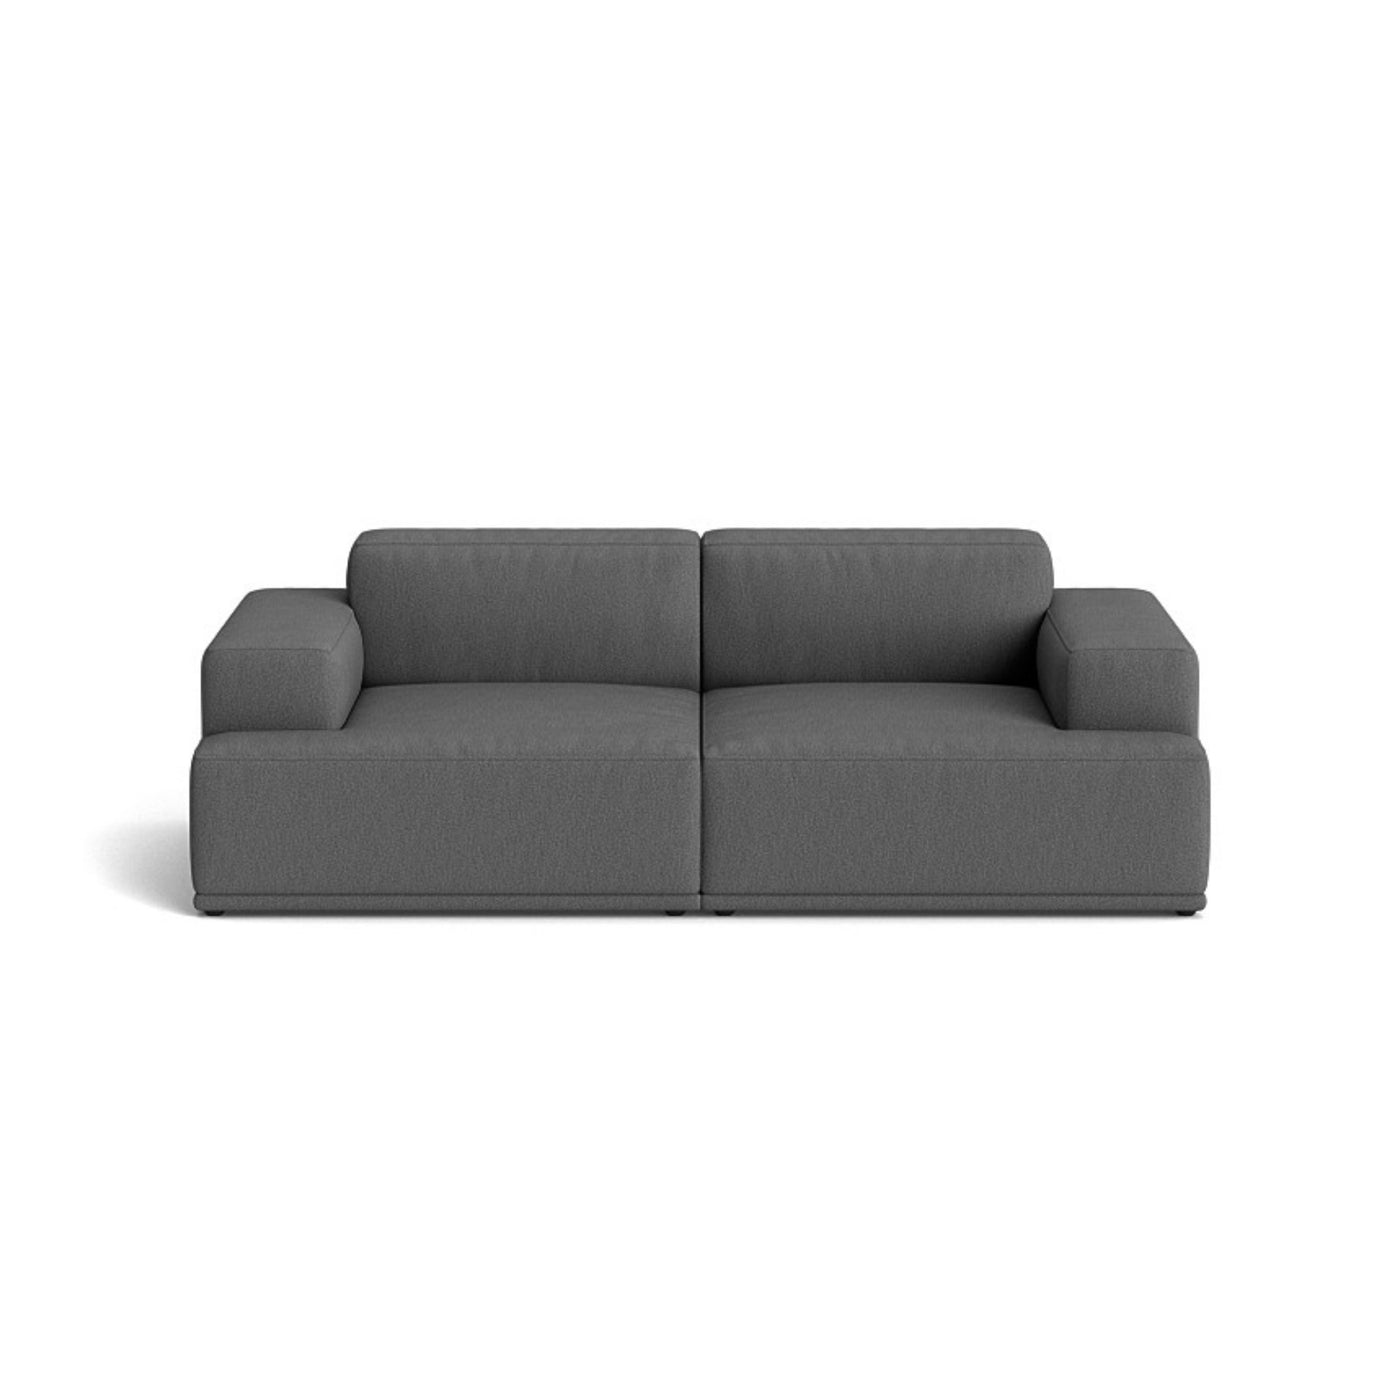 Muuto Connect Soft Modular 2 Seater Sofa, configuration 1. made-to-order from someday designs. #colour_clay-13